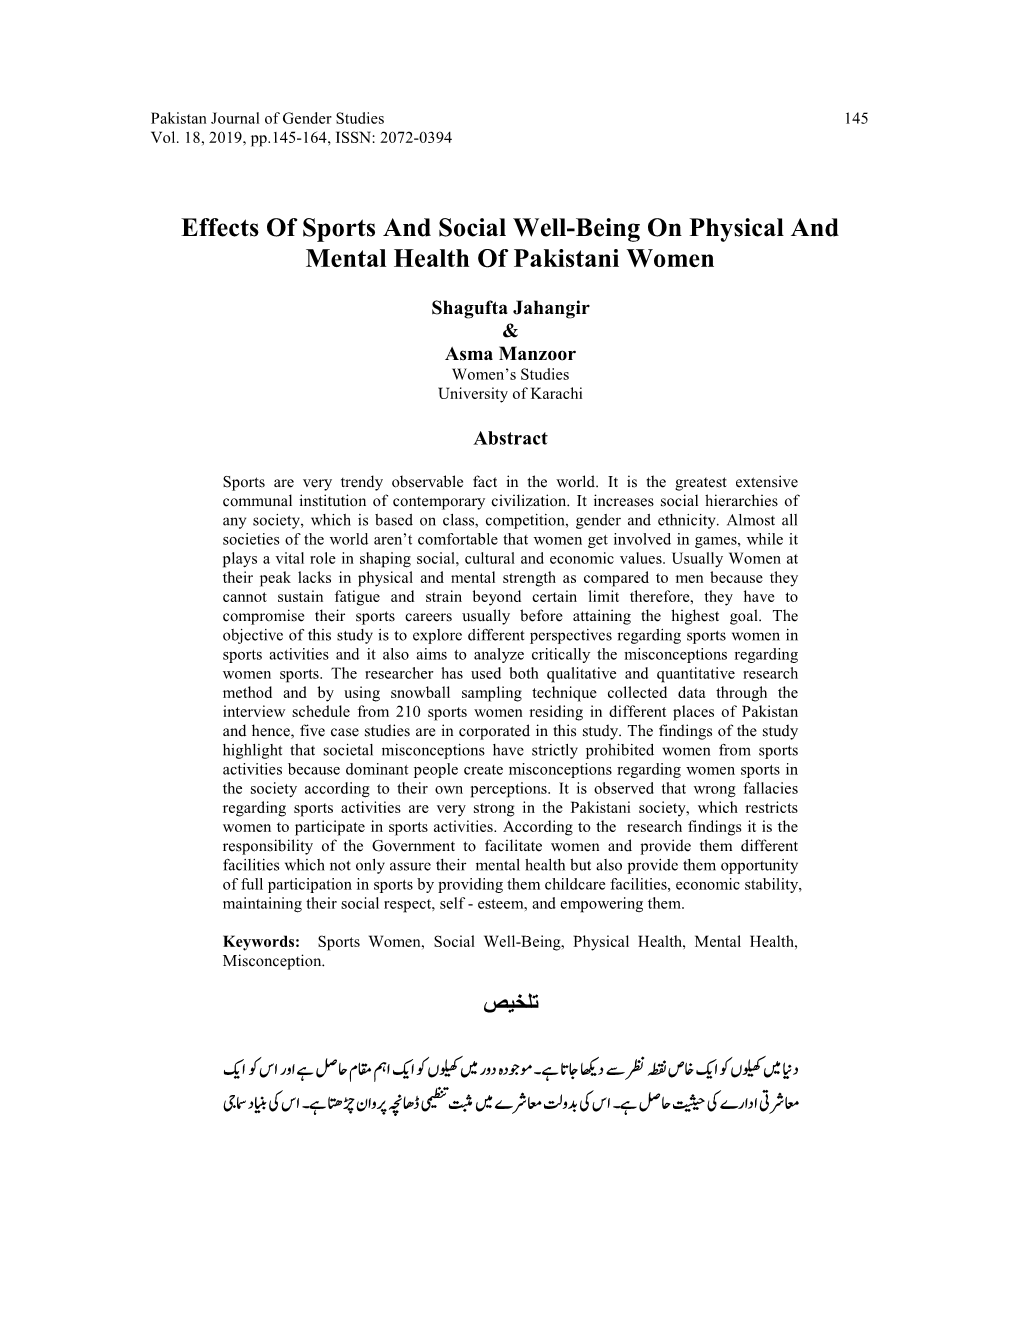 Effects of Sports and Social Well-Being on Physical and Mental Health of Pakistani Women